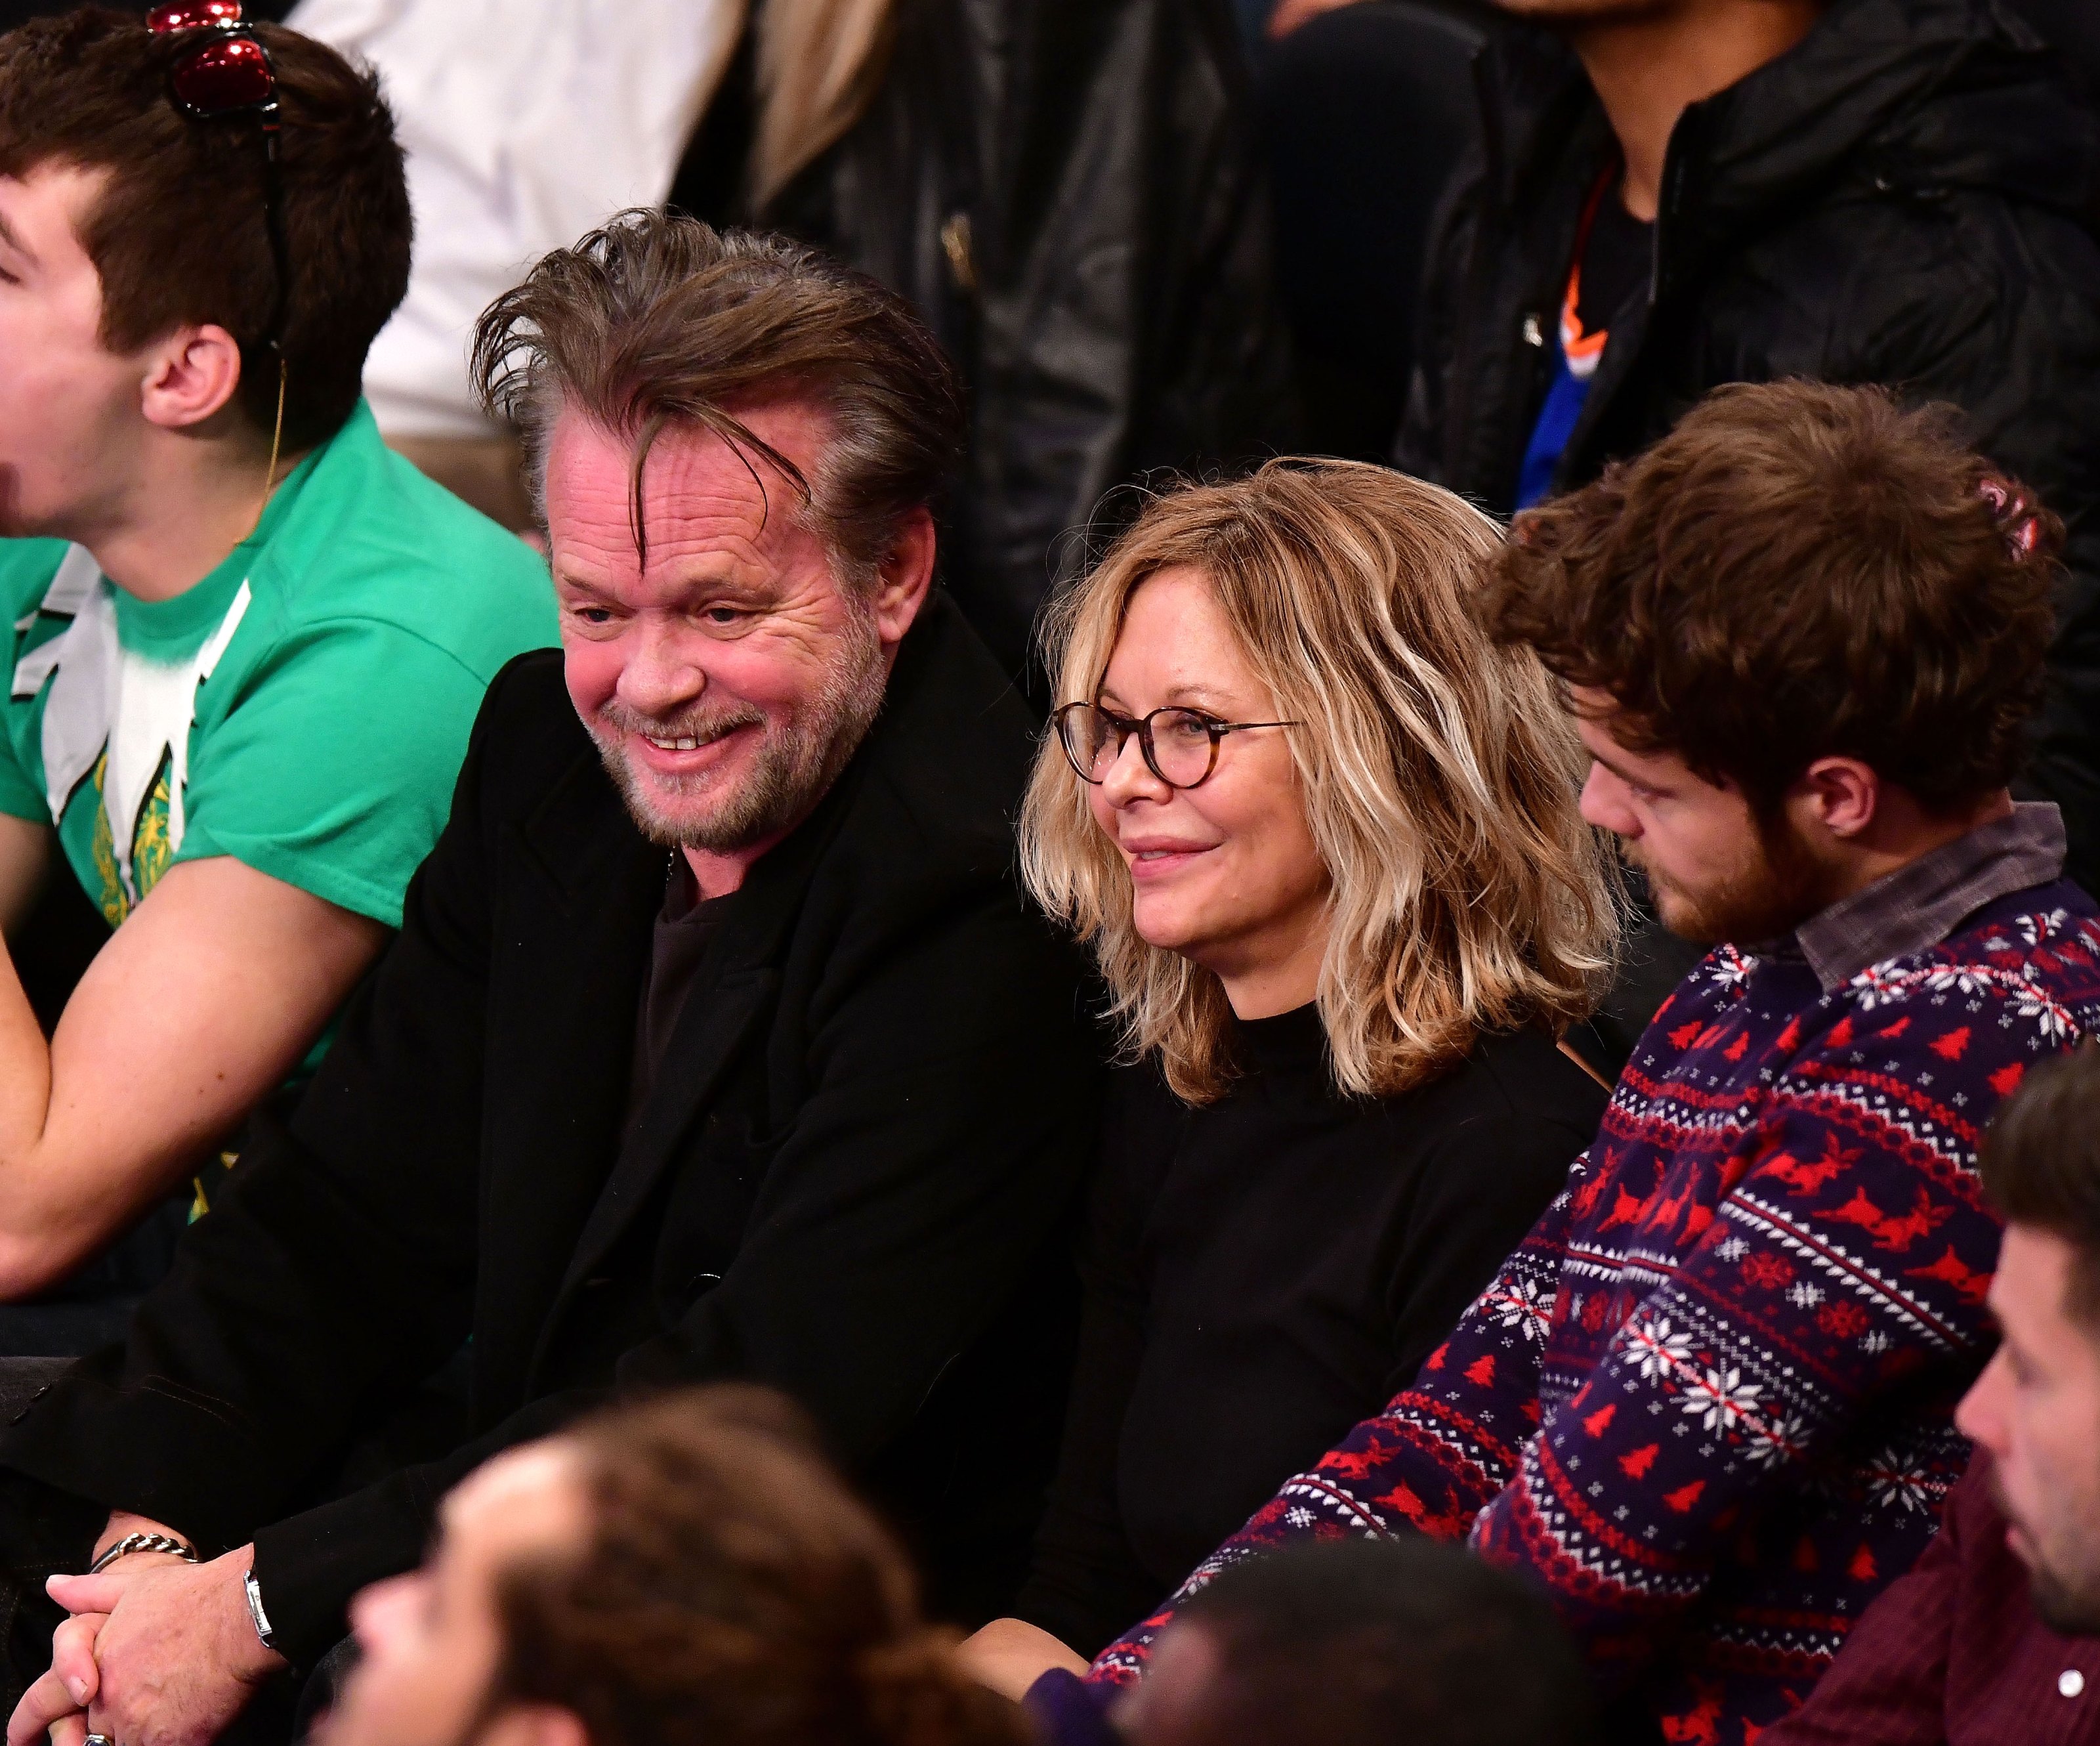 Meg Ryan, John Mellencamp Are Engaged After Dating OnOff for Years